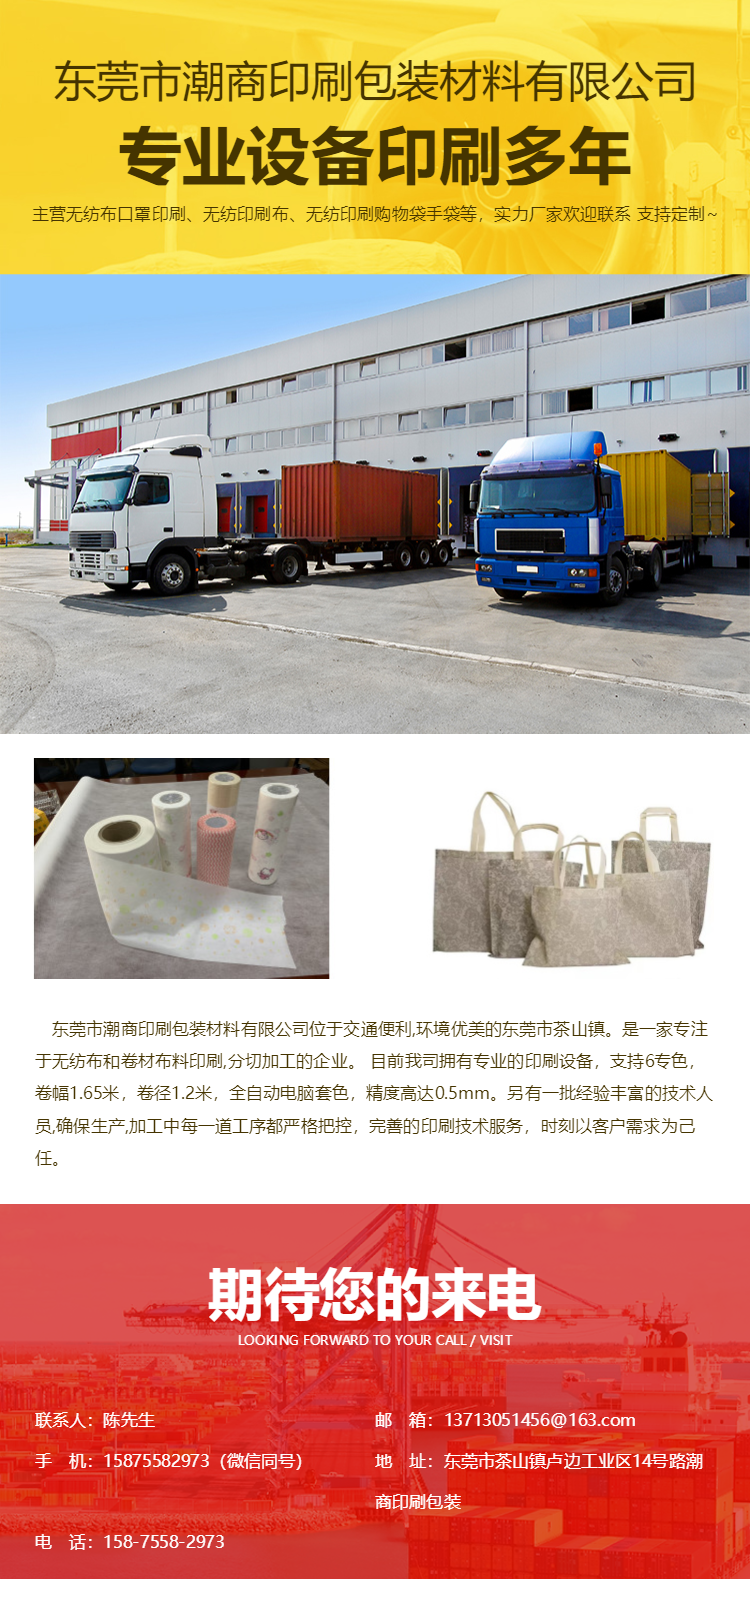 Non woven printing storage box printing Personalized customized Nonwoven fabric storage bag Direct shipping to Chaoshang